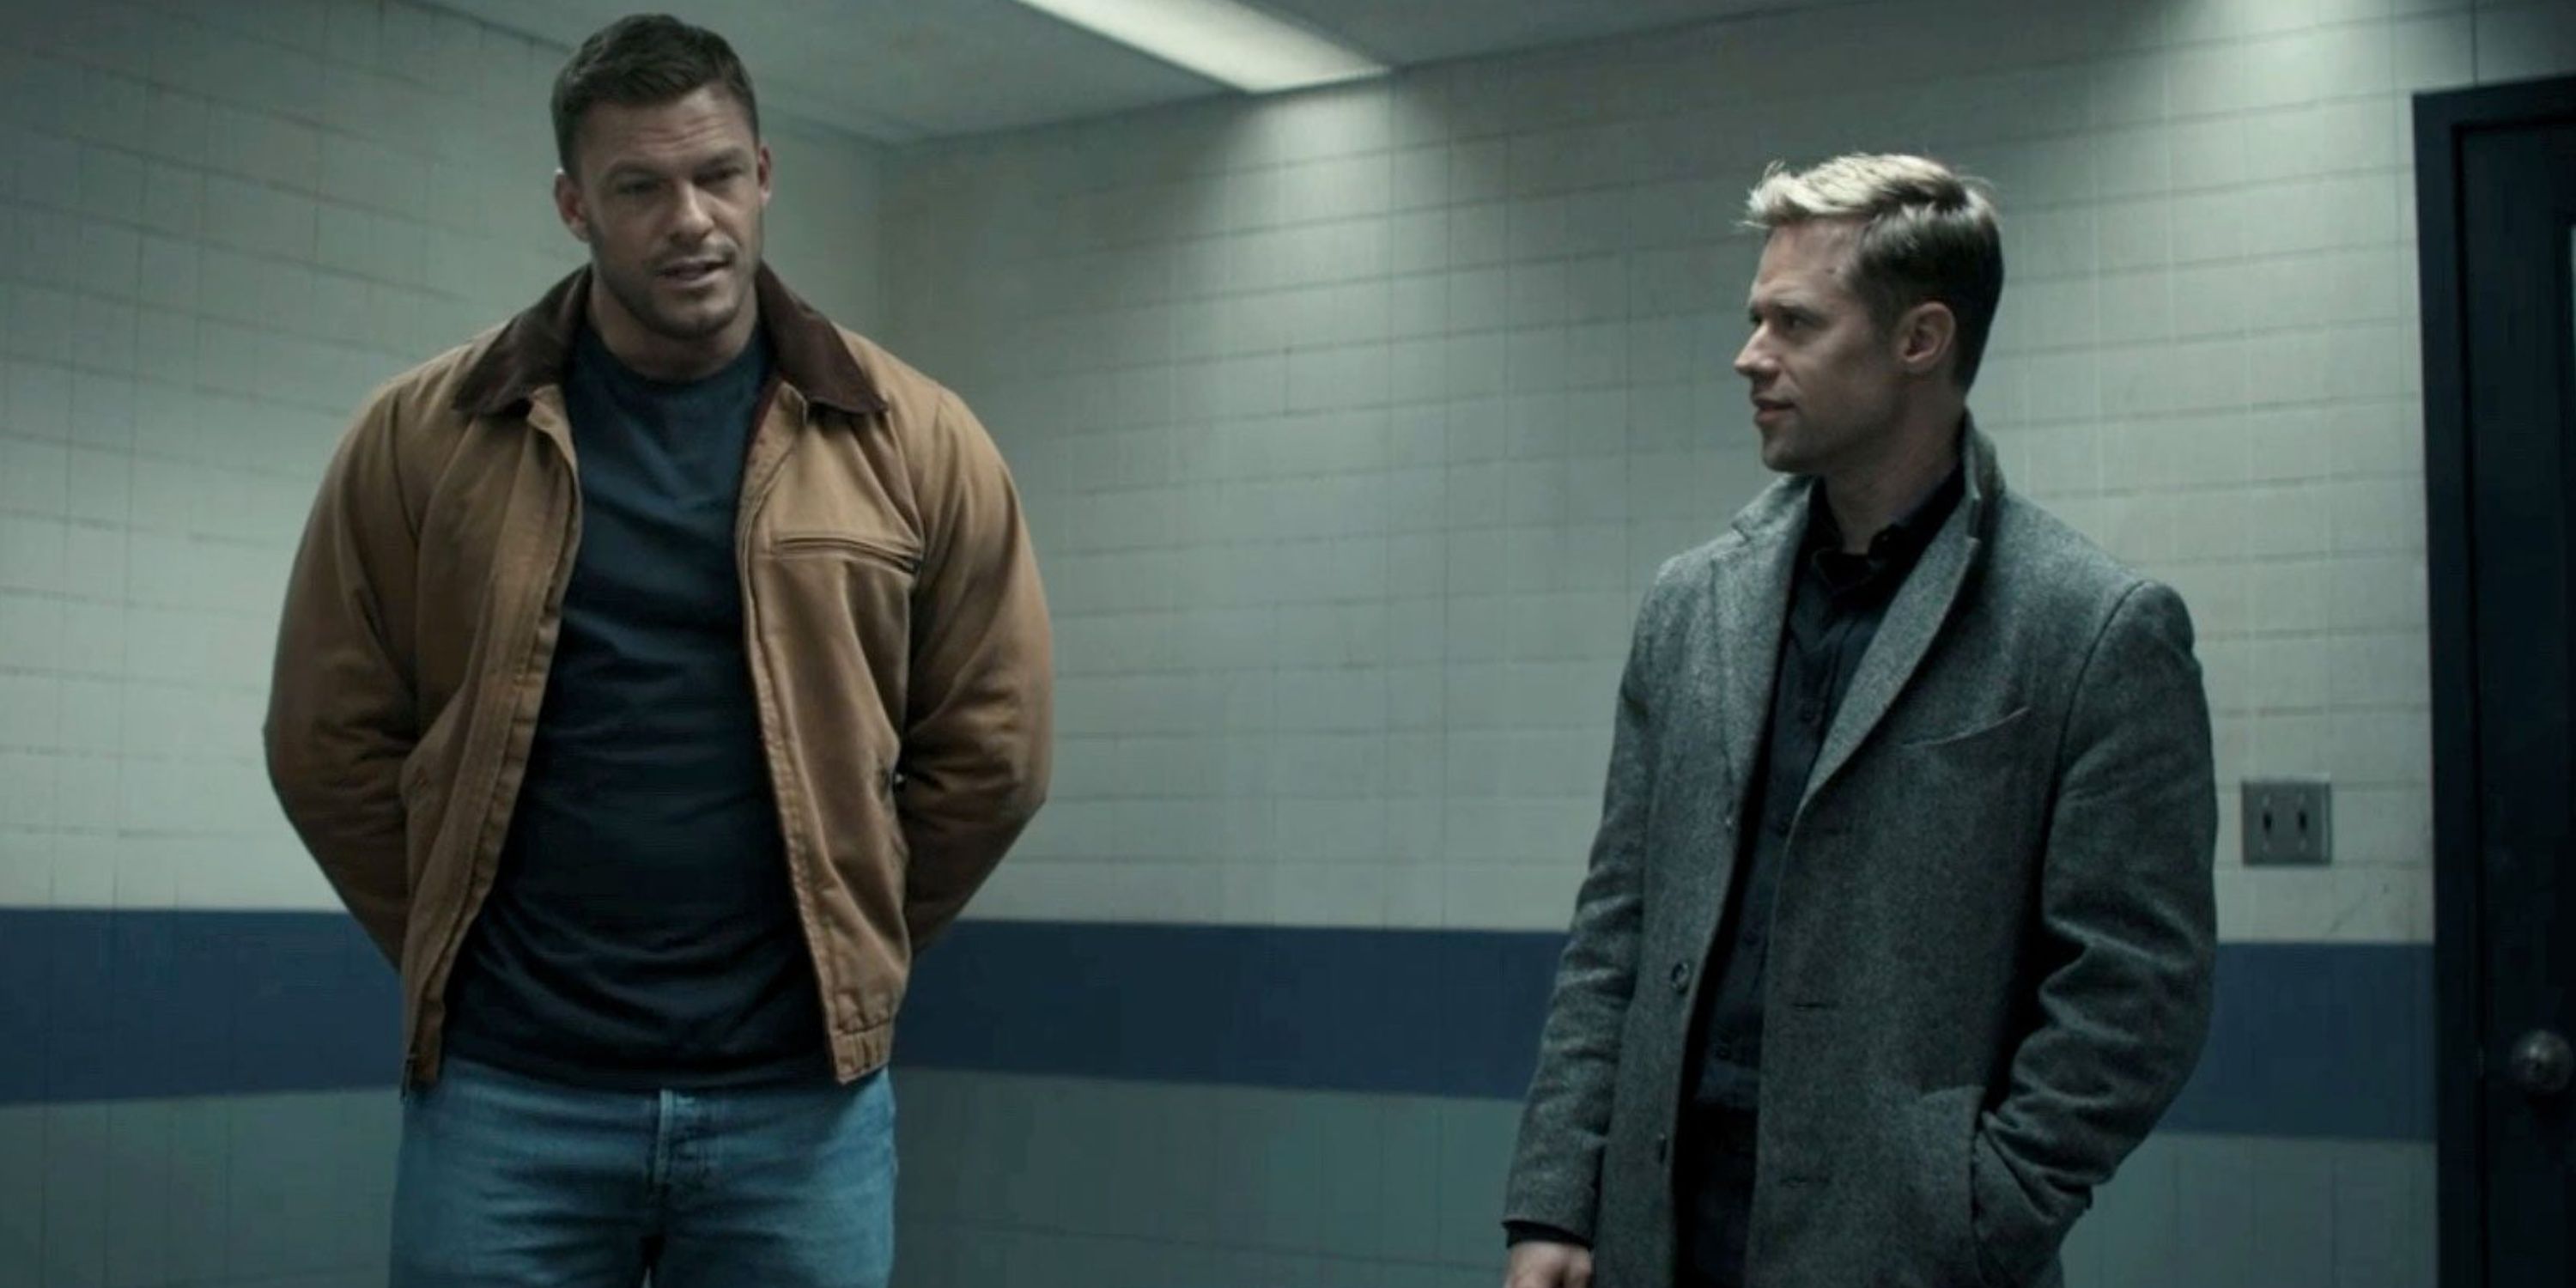 Reacher and O'Donnell stand in a police interrogation room